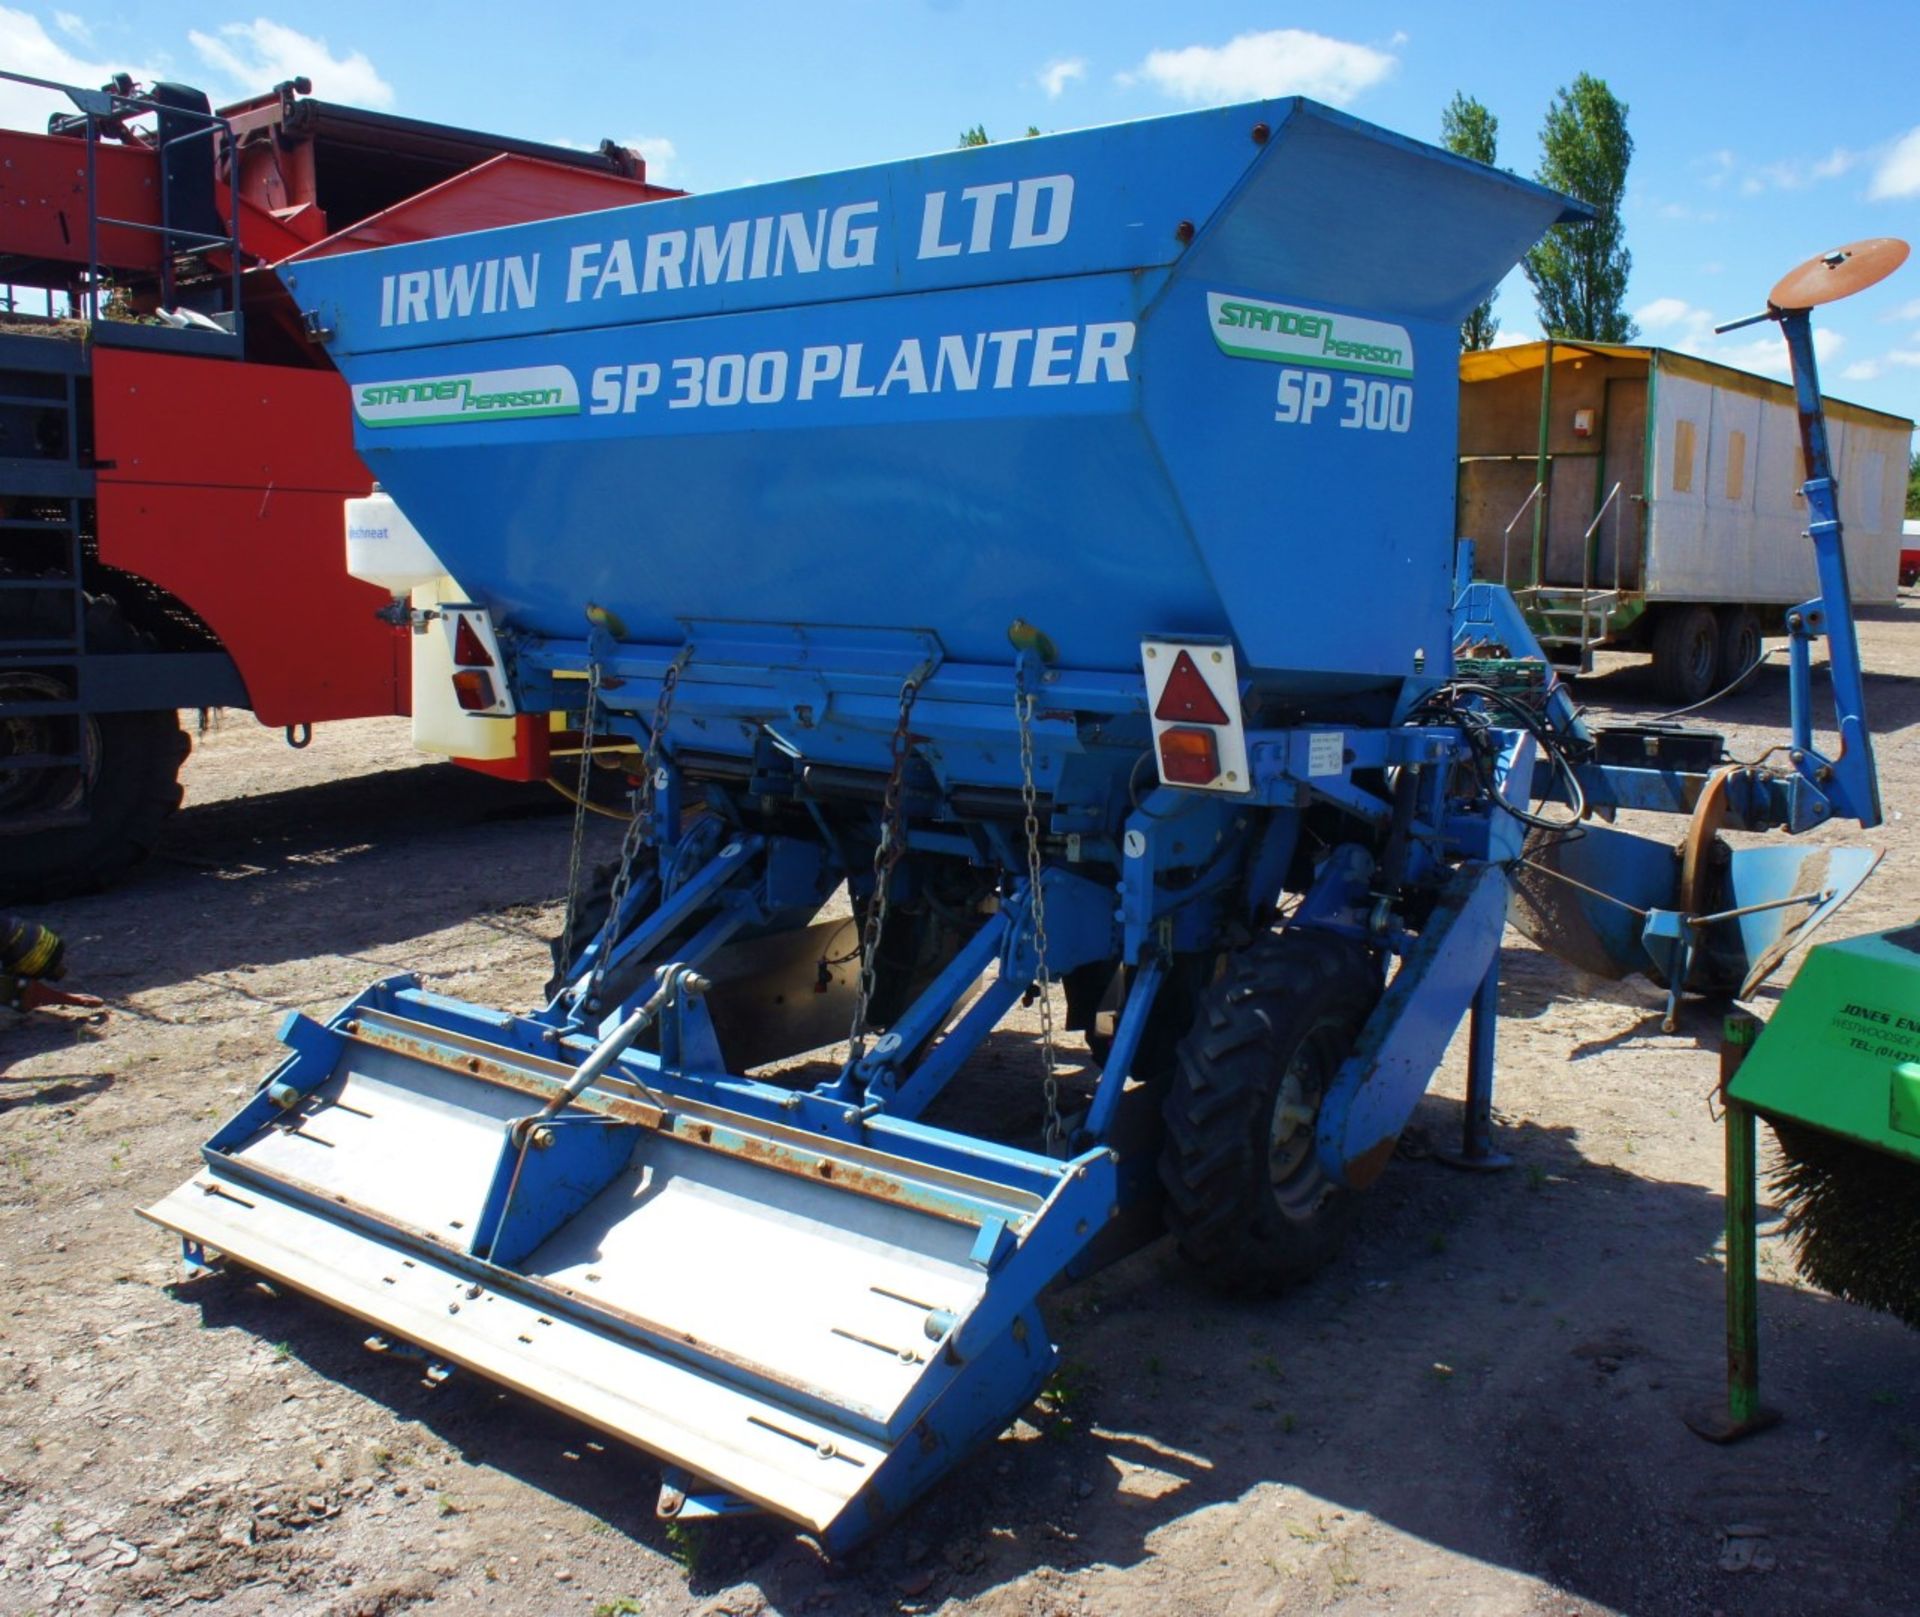 Standen Pearson BB3 (SP300), 3 Row Potato Planter, Serial Number 678, Year 2012